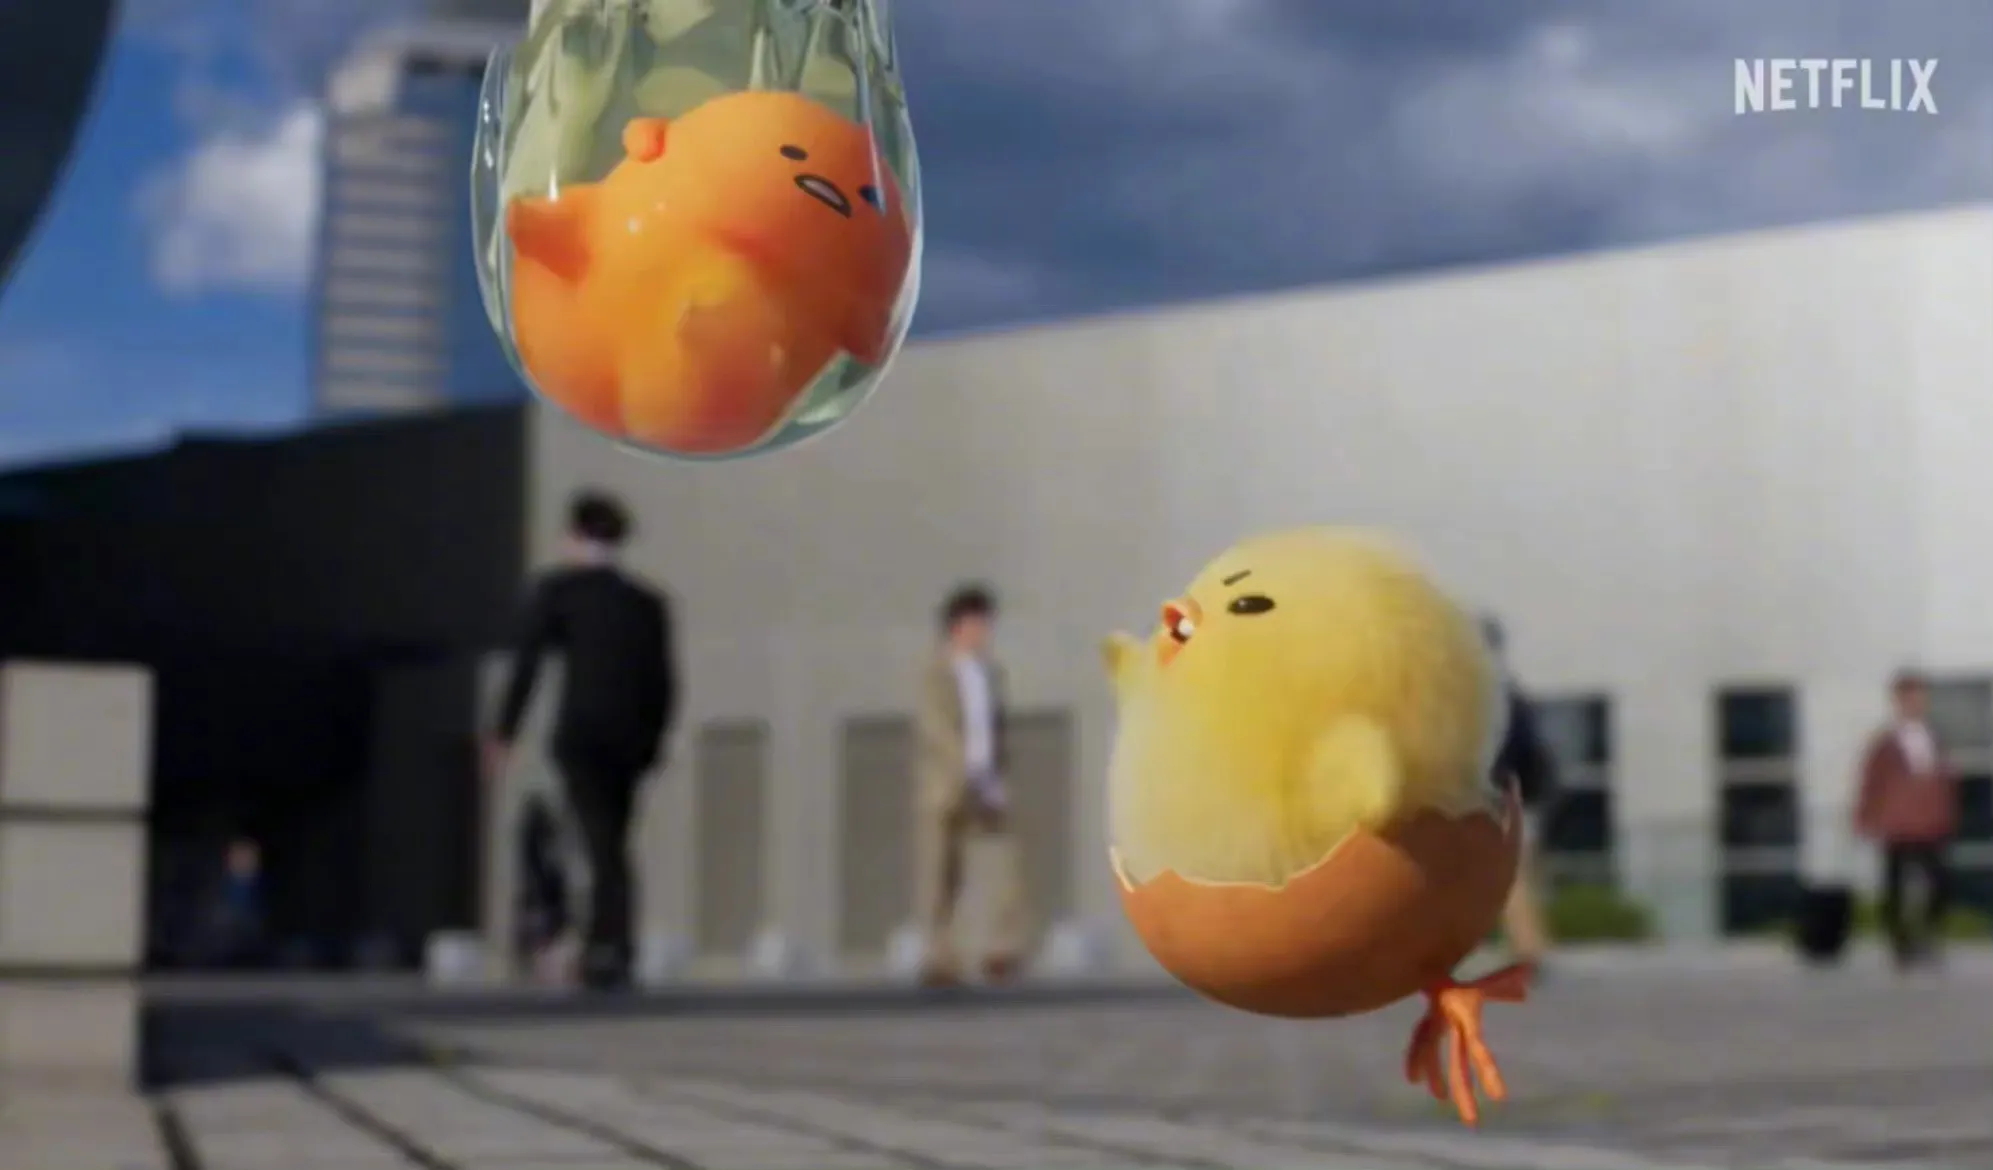 Touching imagery in 'Gudetama: An Eggcellent Adventure' | FMV6